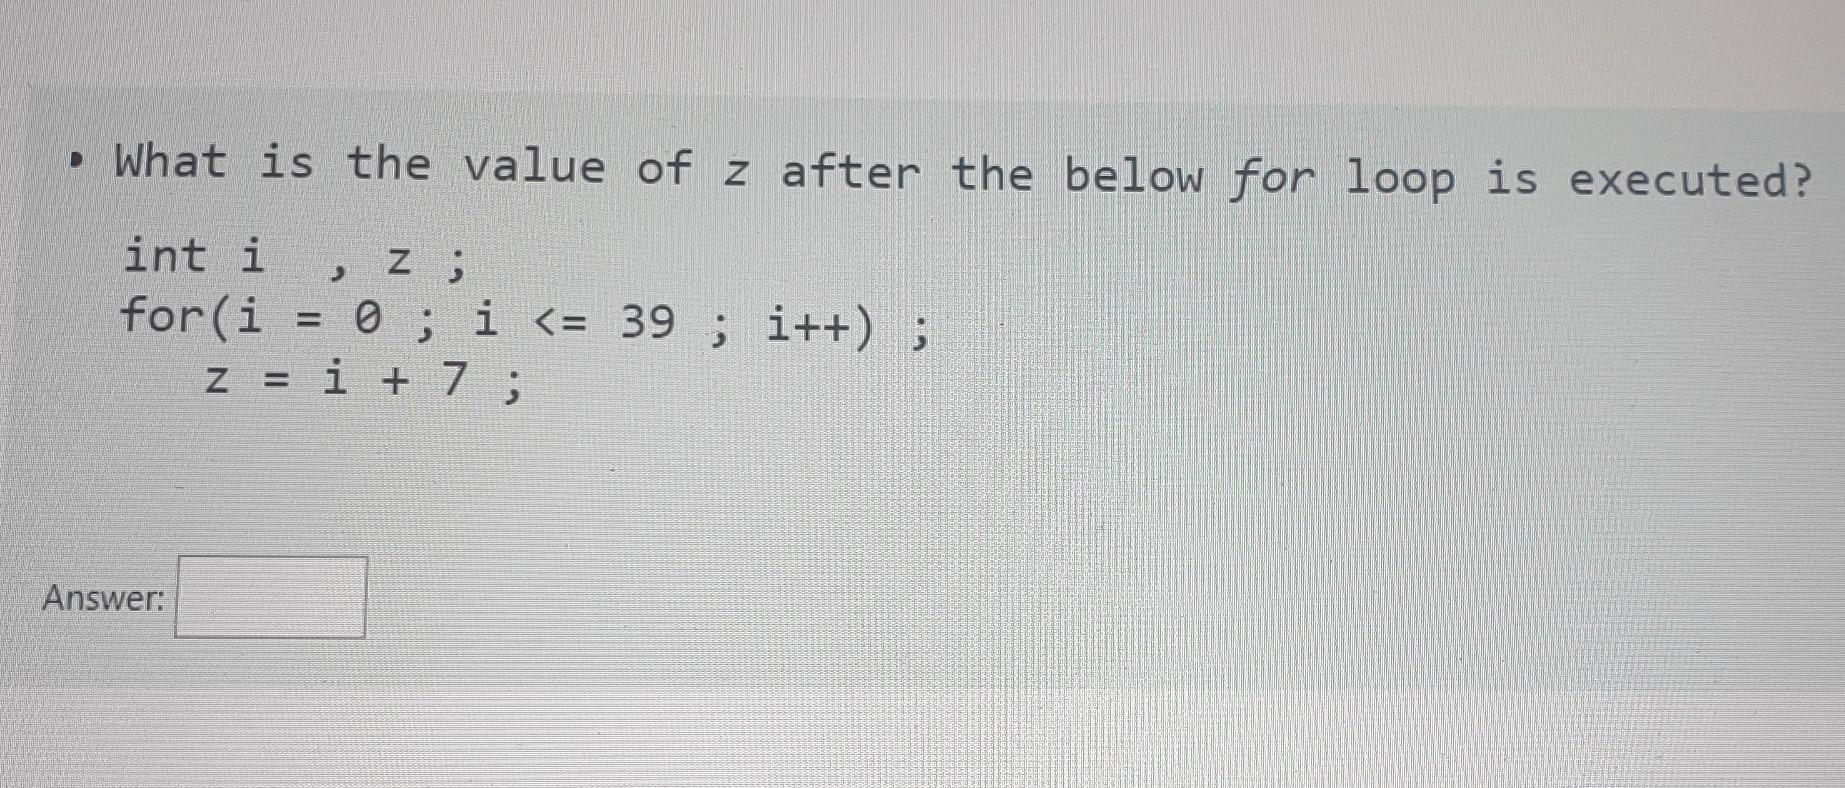 What is the value of z after the below for loop is executed? int i Z; J for (i =0; i